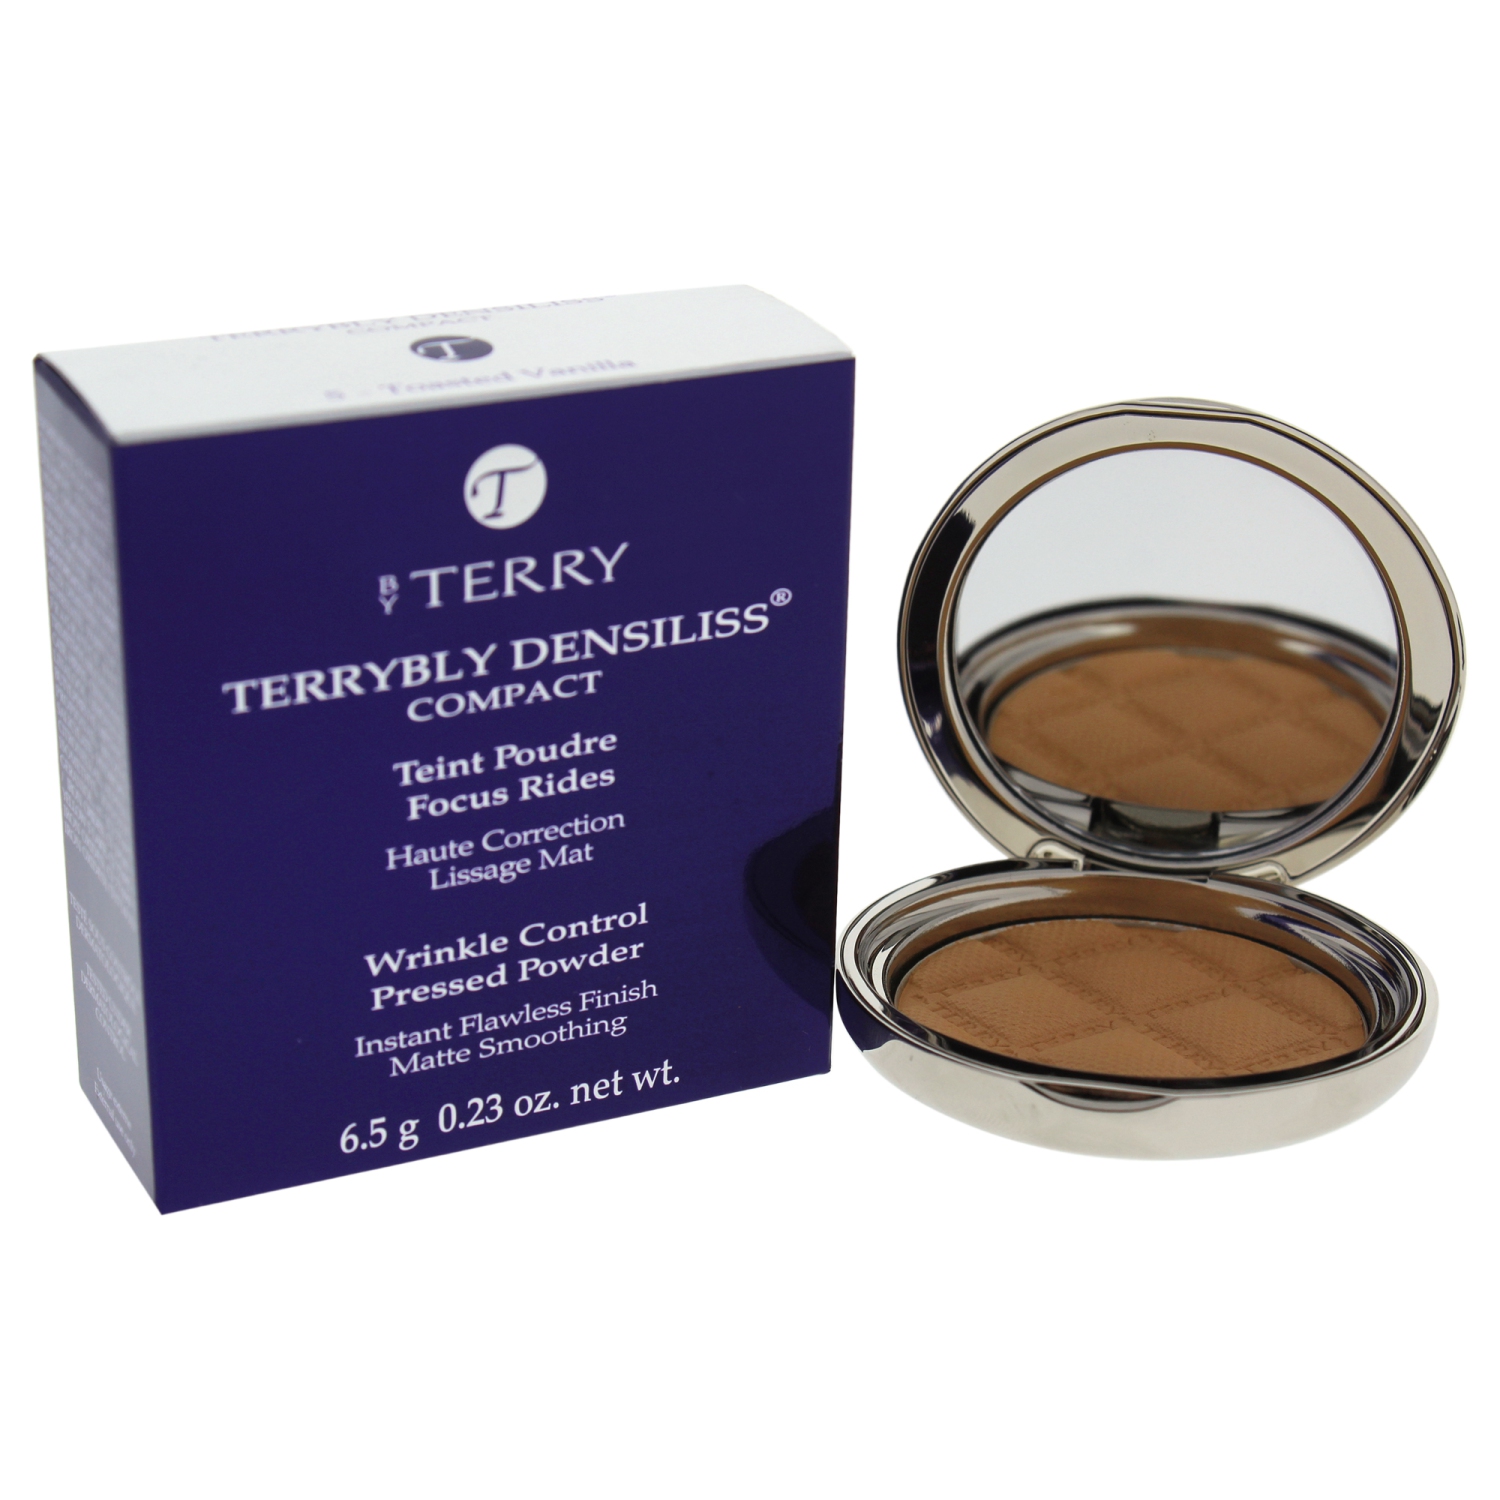 Terrybly Densiliss Compact (Wrinkle Control Pressed Powder) - # 5 Toasted Vanilla - 6.5g-0.23oz